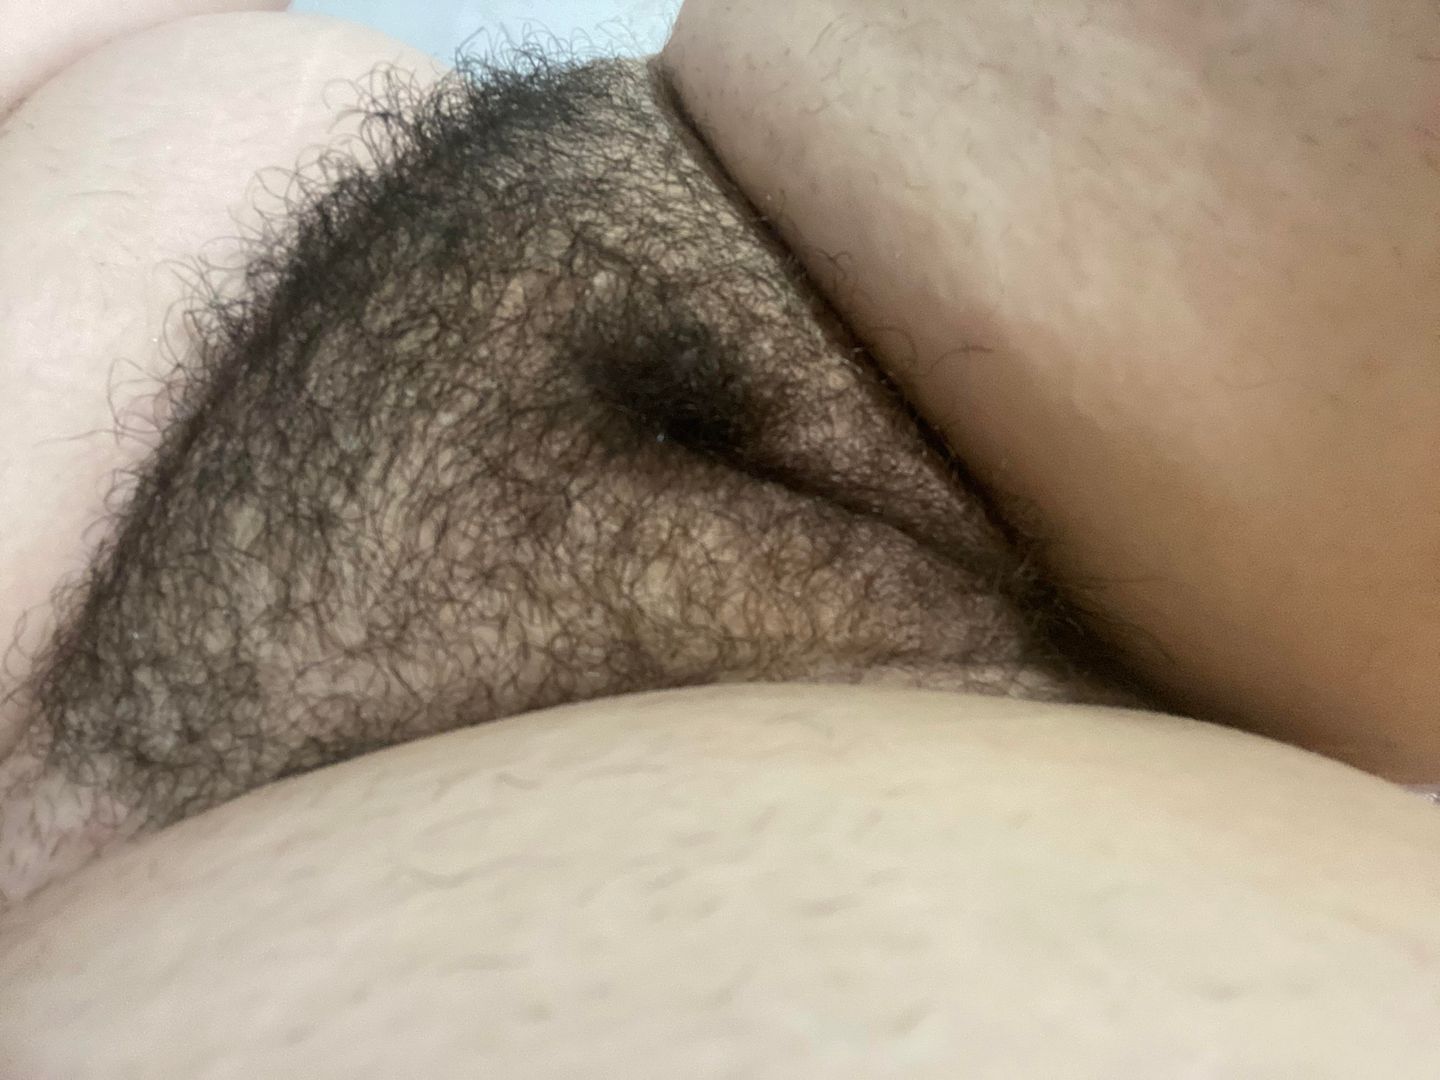 Fat Hairy Pussy Pics worm porn